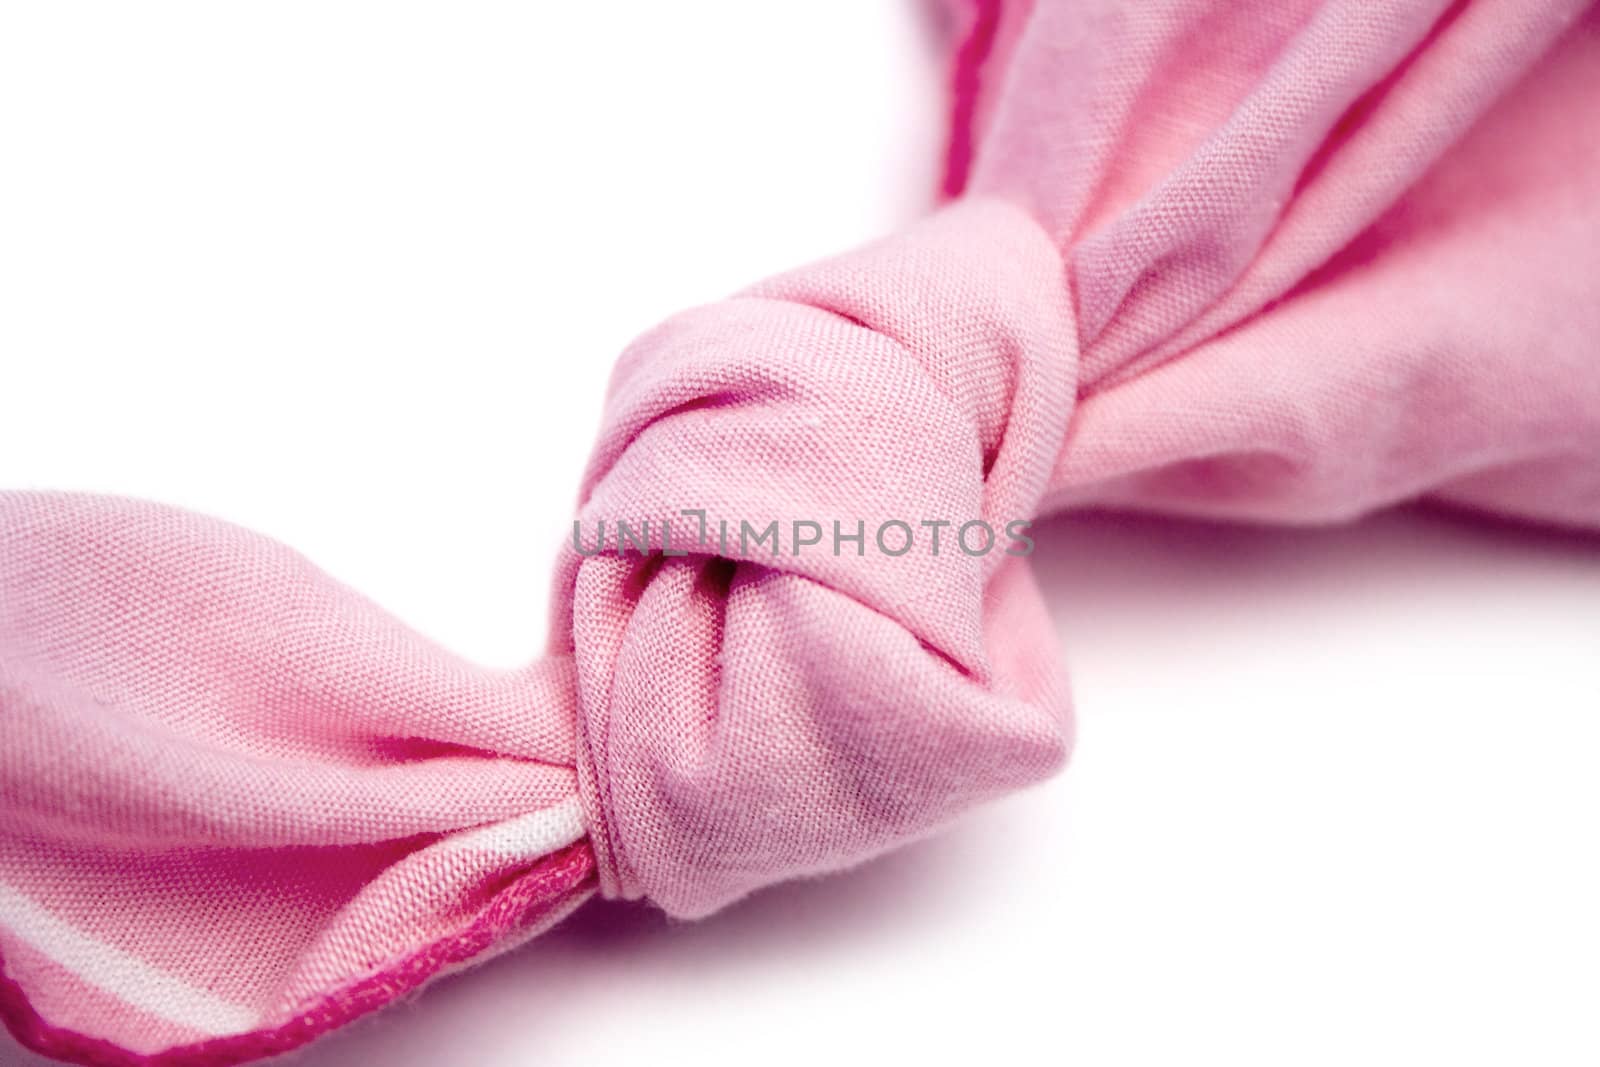 Knotted pink handkerchief isolated on a white background.